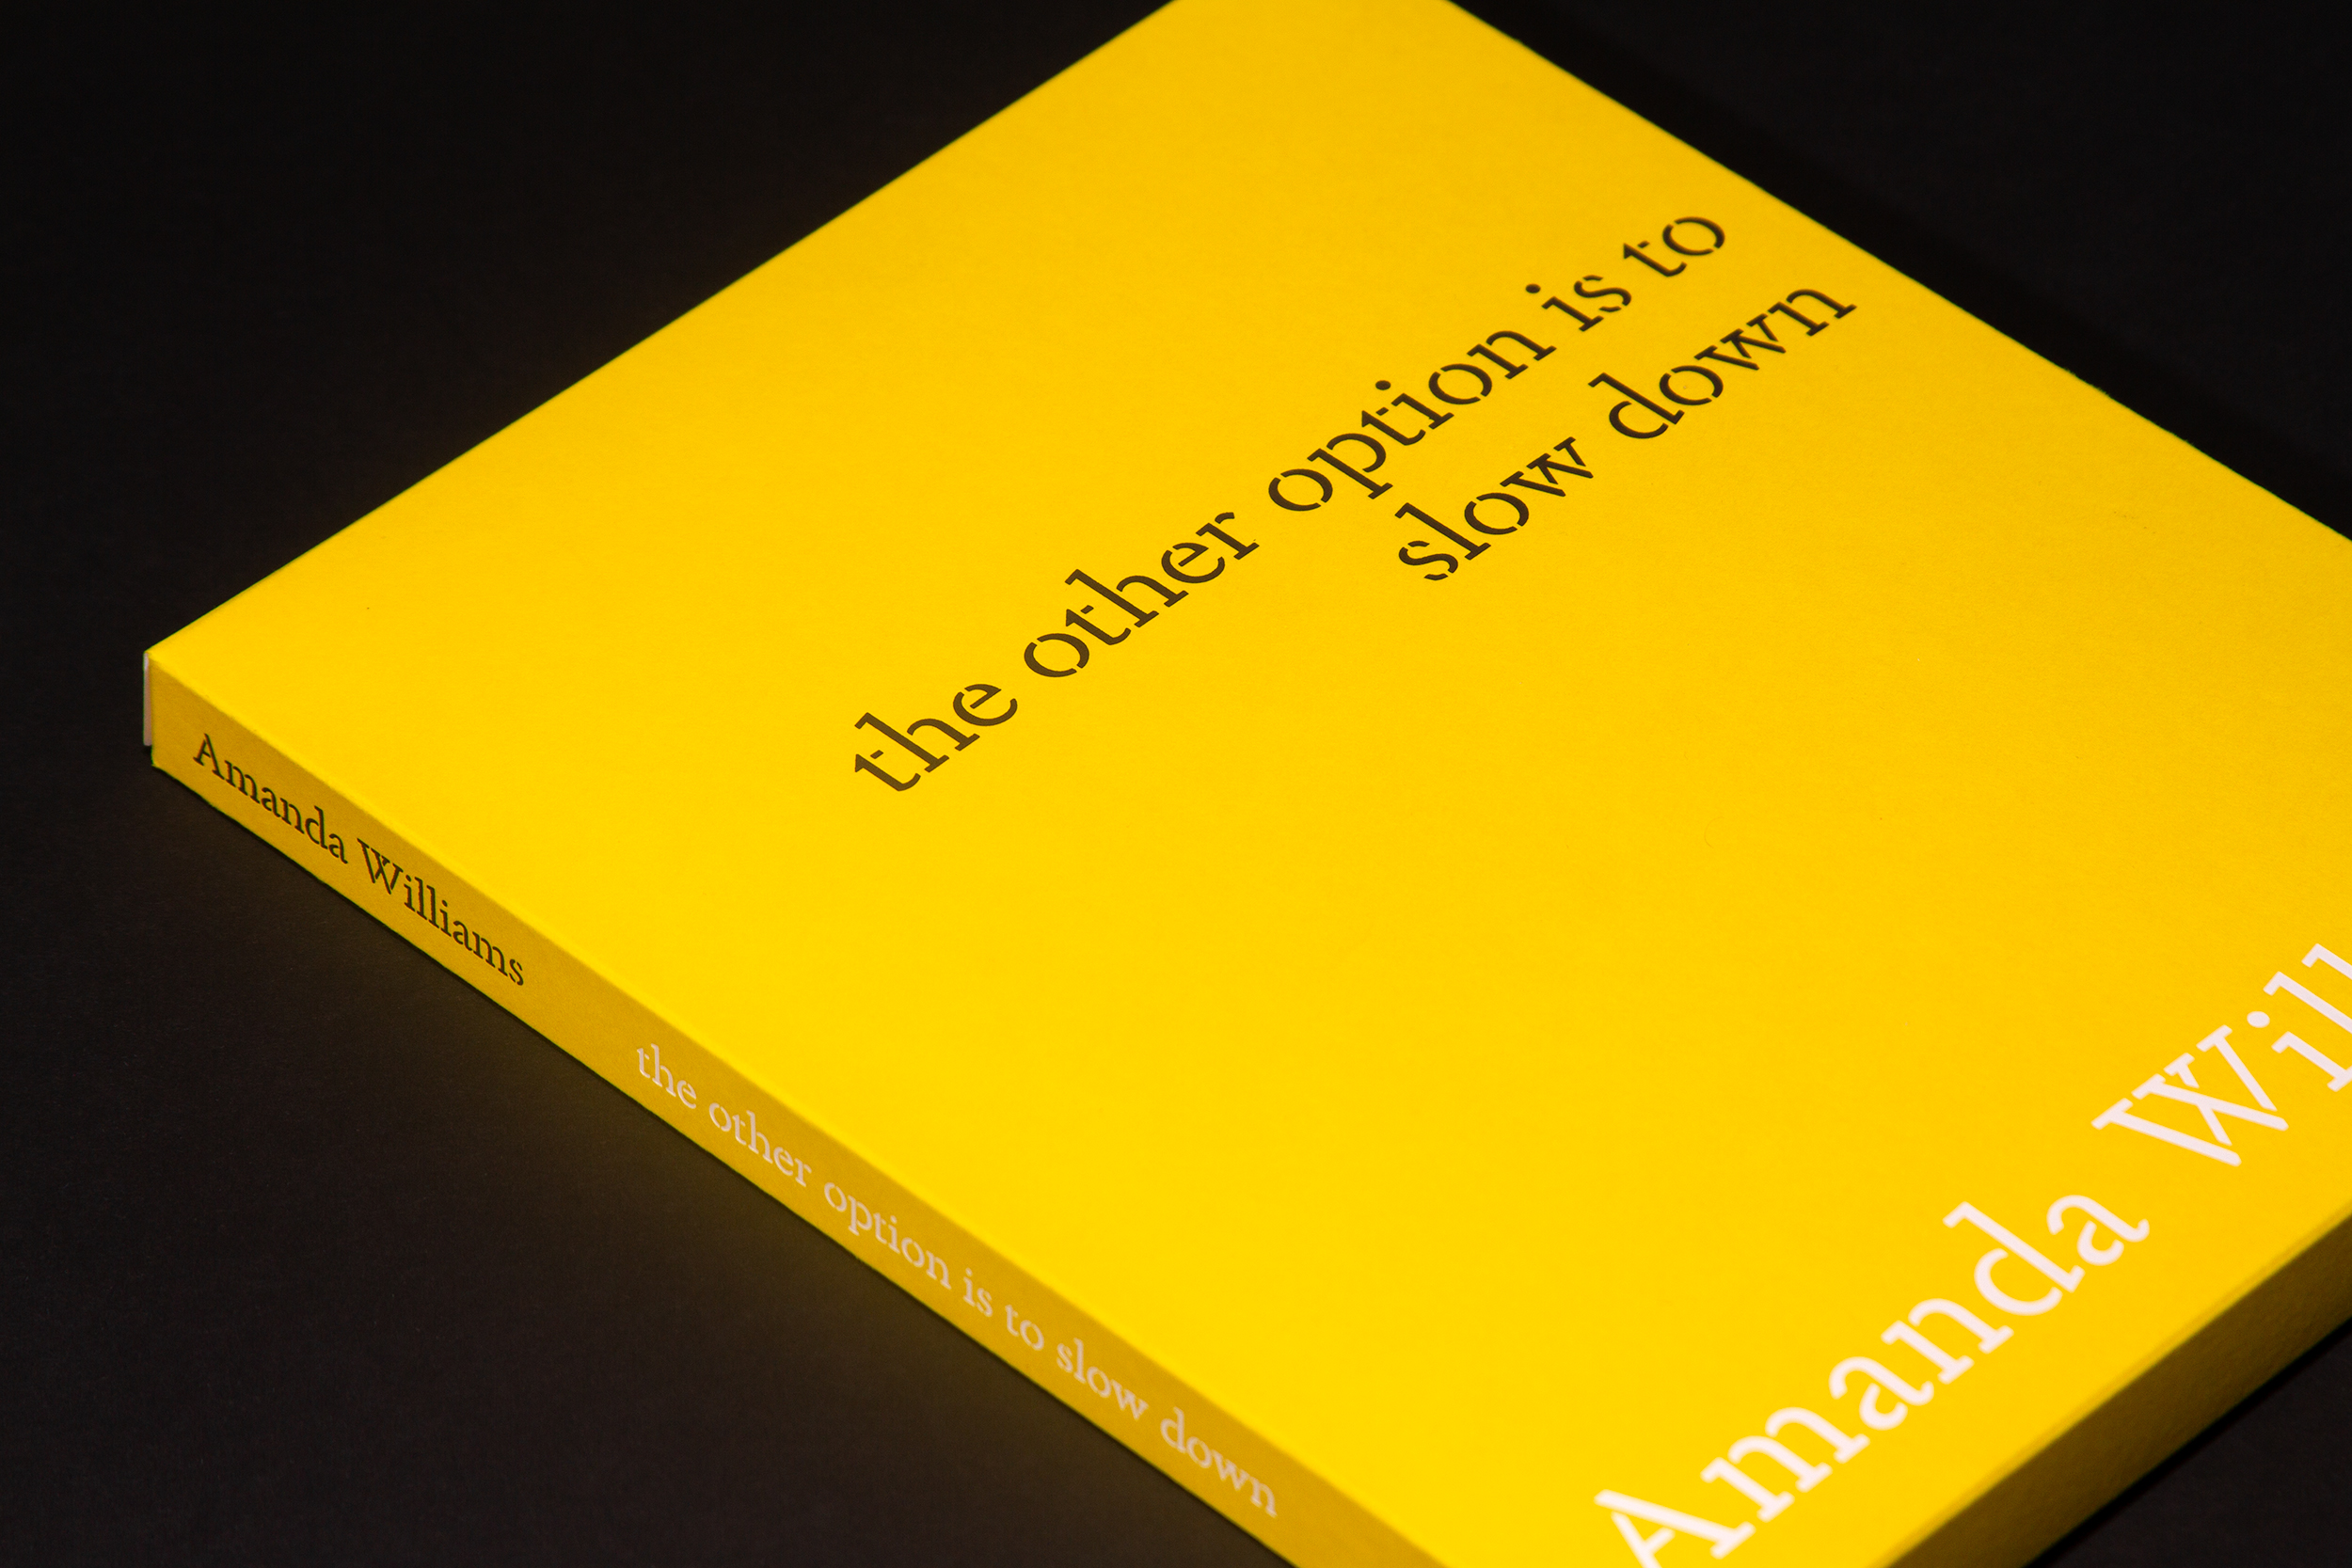 Yellow covered book laying sideways on a black background